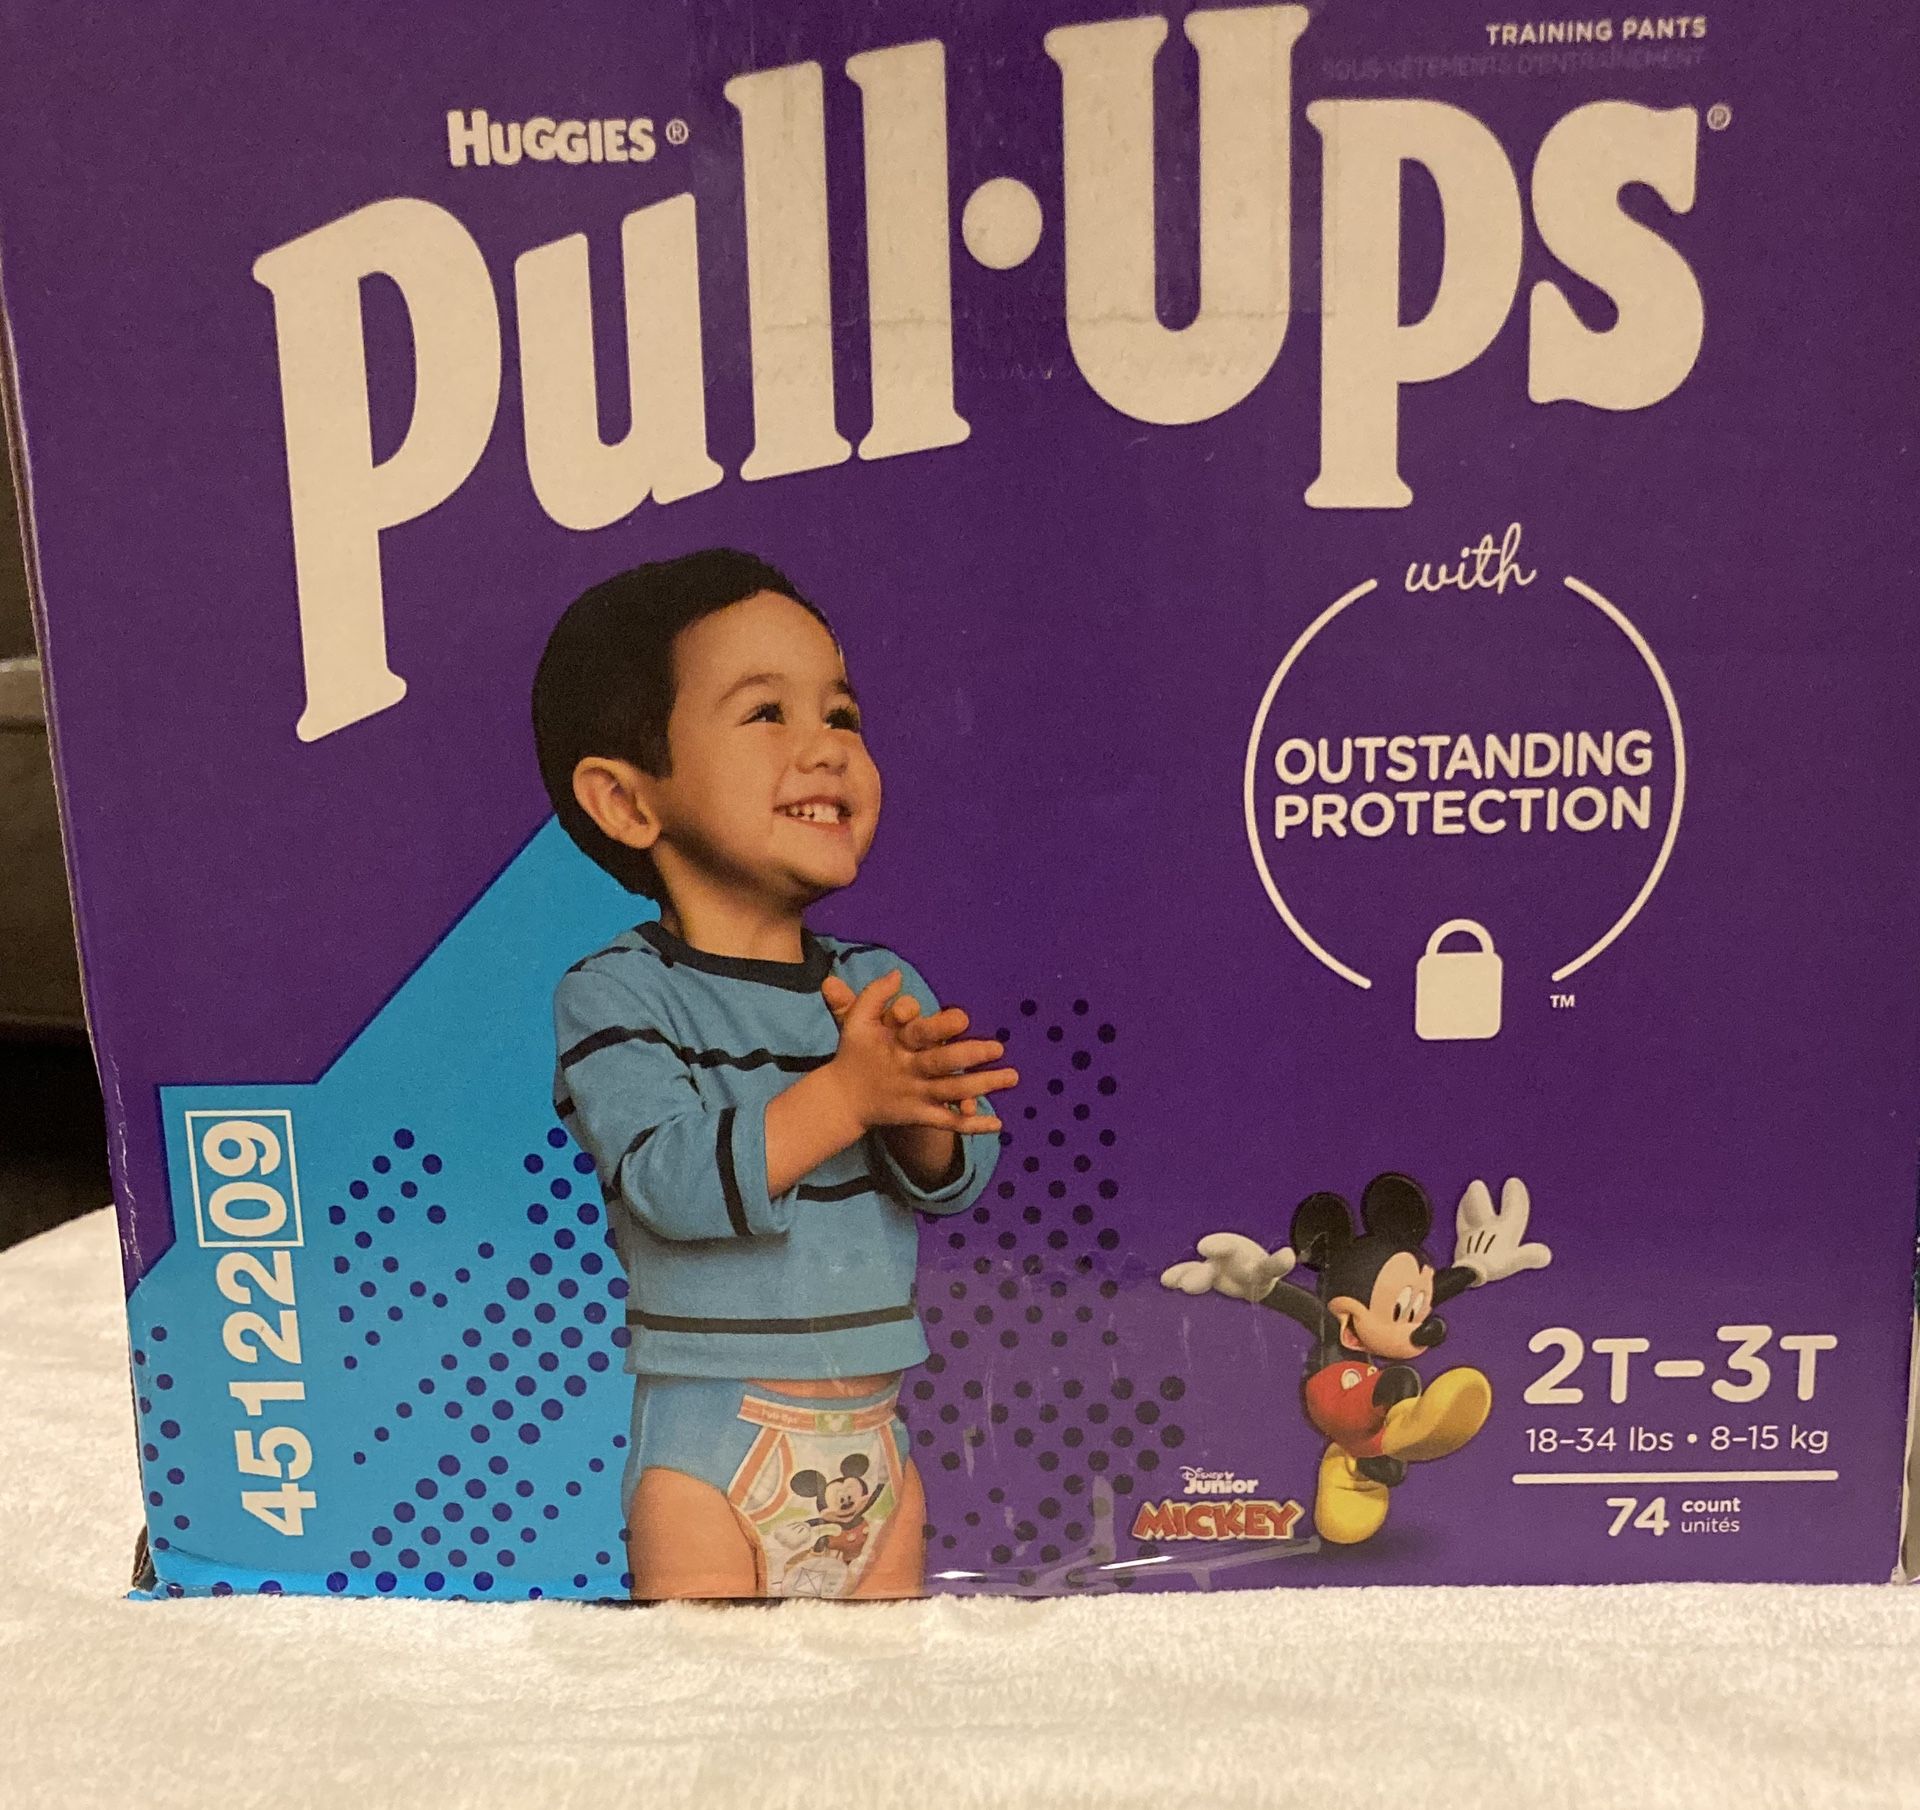 Huggies Pull Ups Learning Designs Boys' Training Pants - 2T-3T 74 count